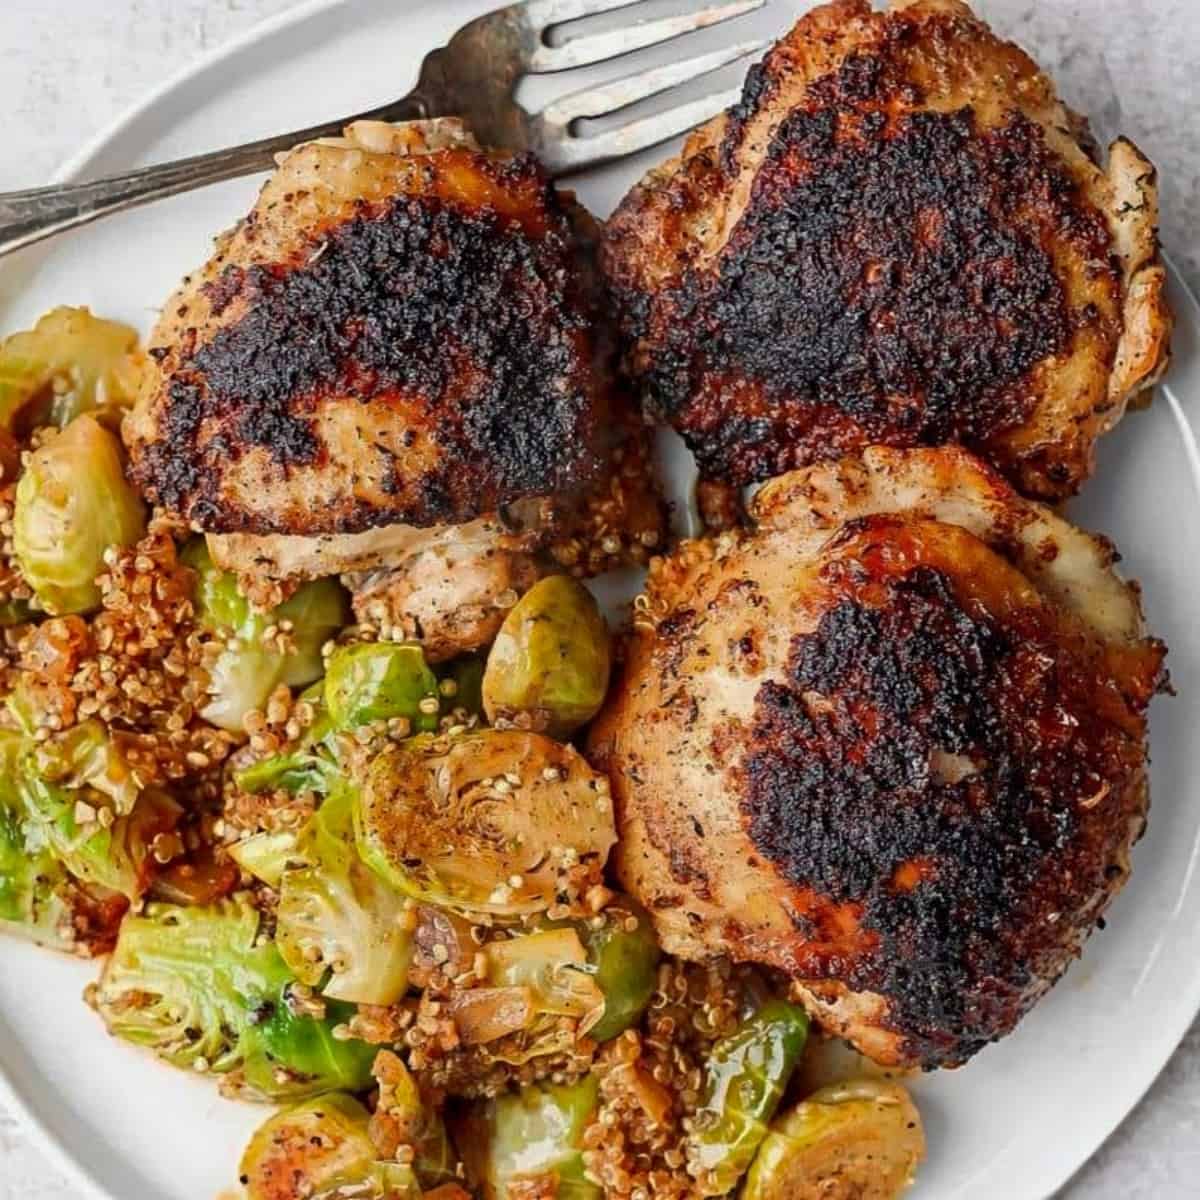 Dutch Oven Chicken Thighs with Brussels Sprouts - Dutch Oven Recipes for Chicken Thighs